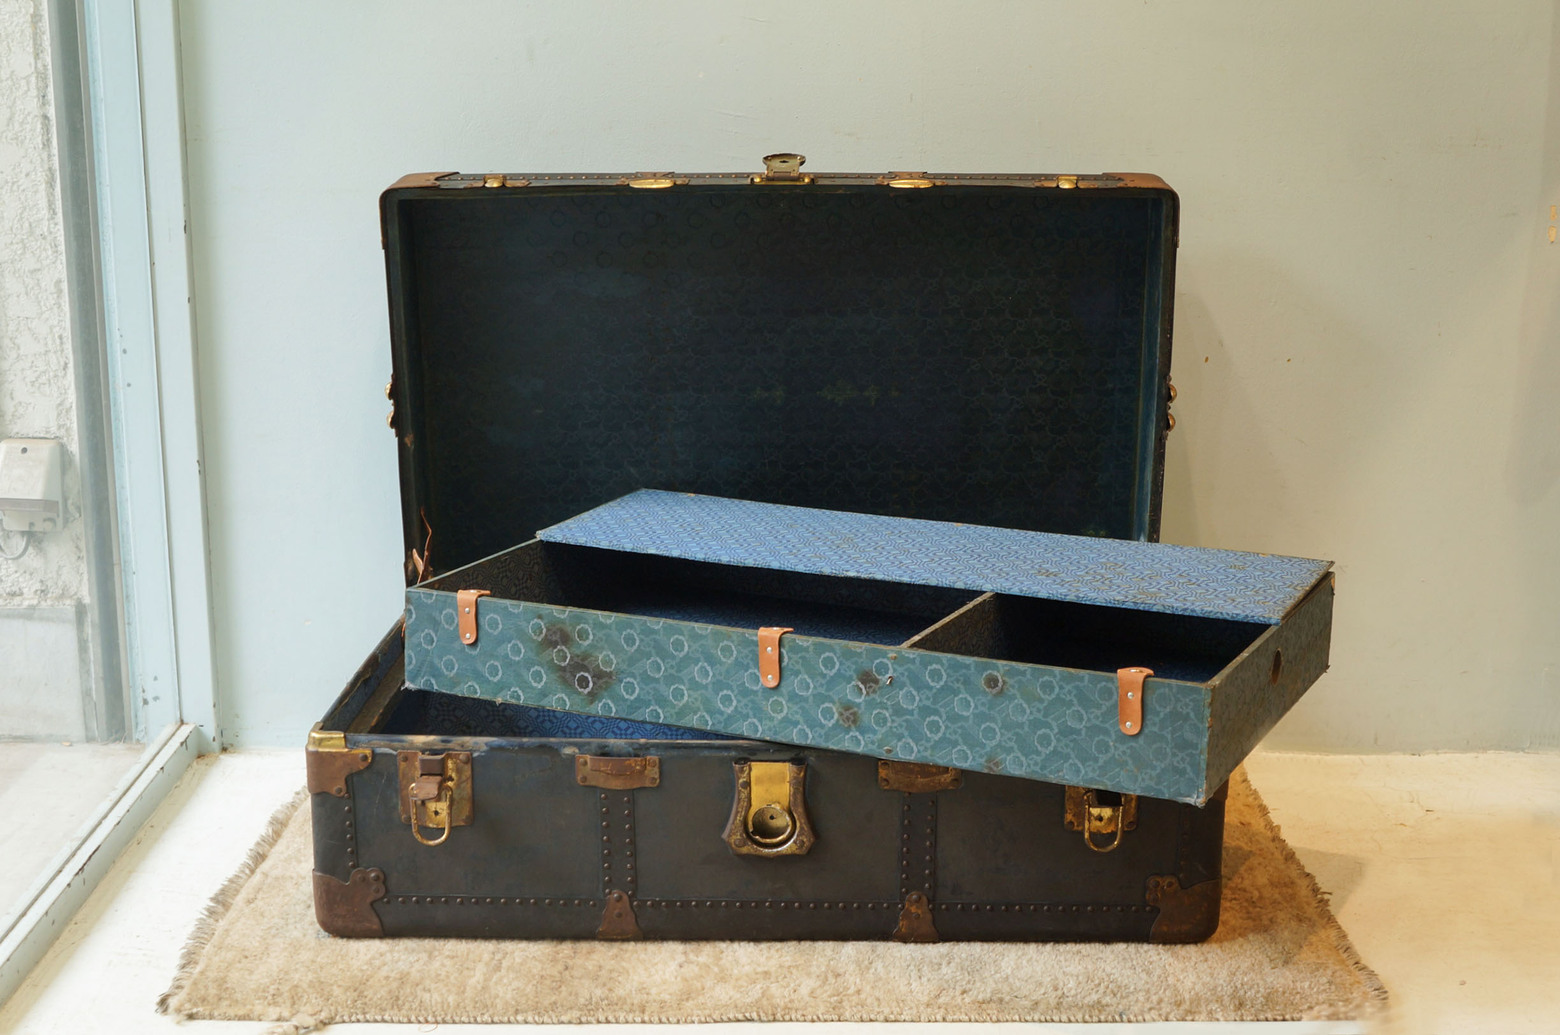 US Antique Steamer Trunk S&S TRUNK AND BAG COMPANY/アメリカ アンティーク スチーマートランク スーツケース ディスプレイ チェスト ボックス 収納 1